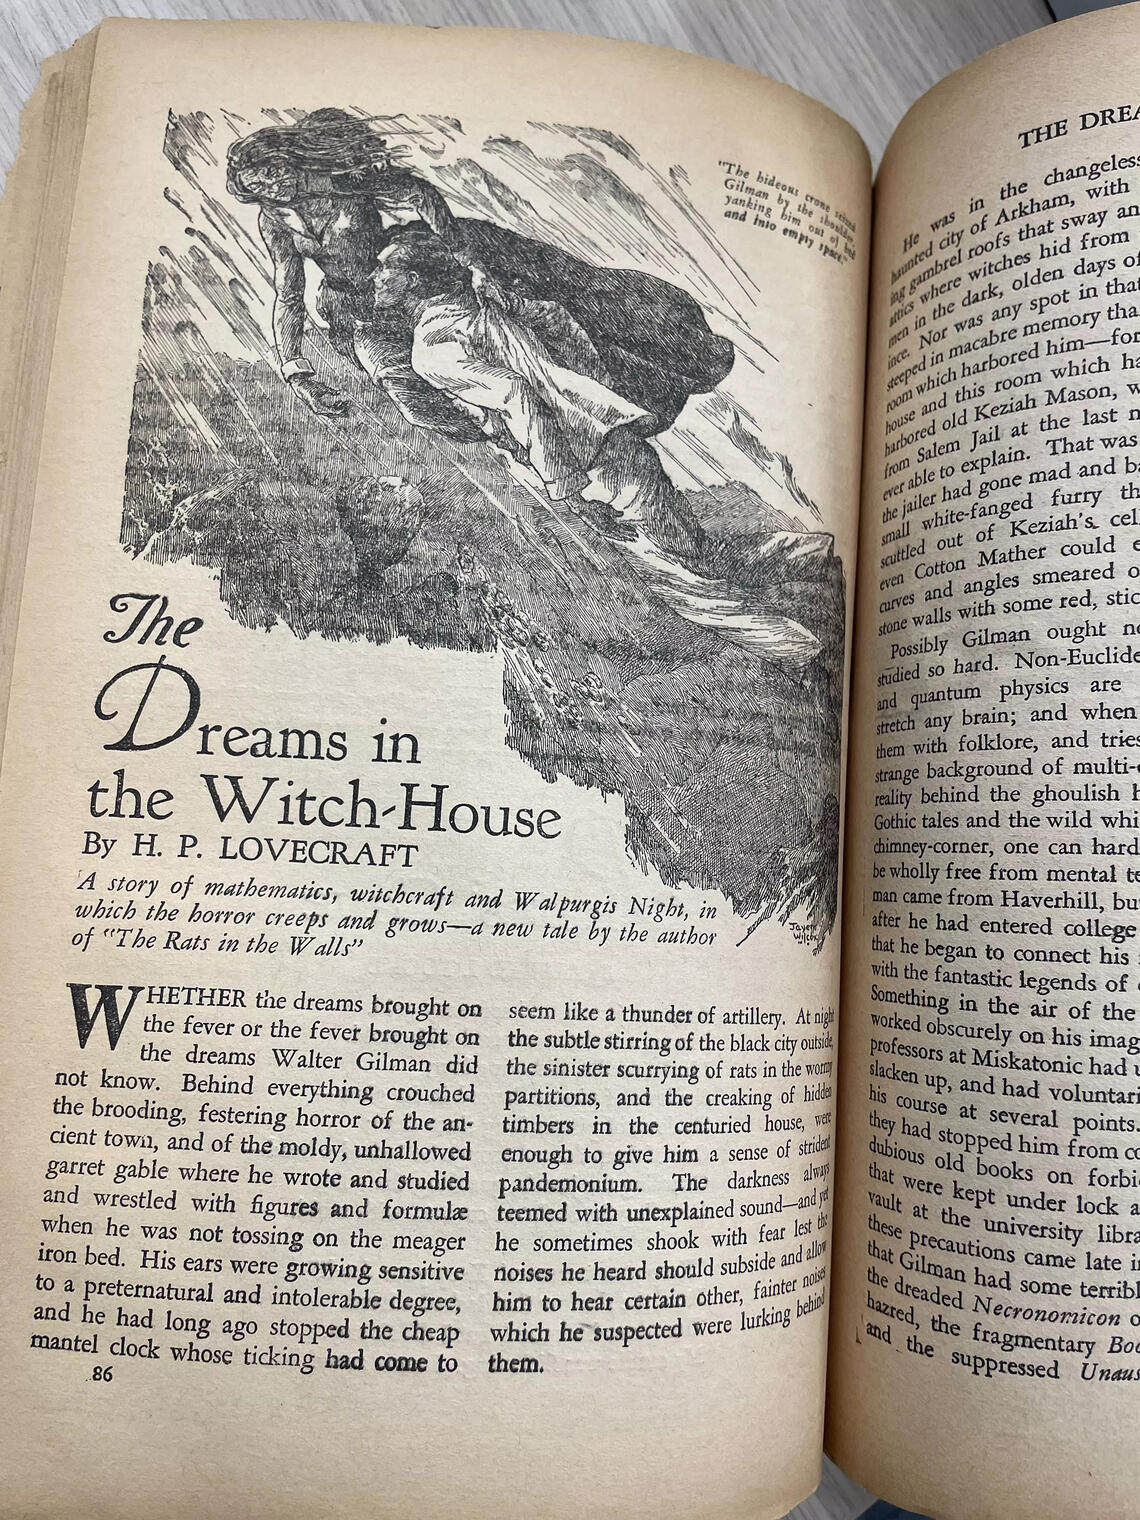 H.P. Lovecraft's The Dreams in the Witch House